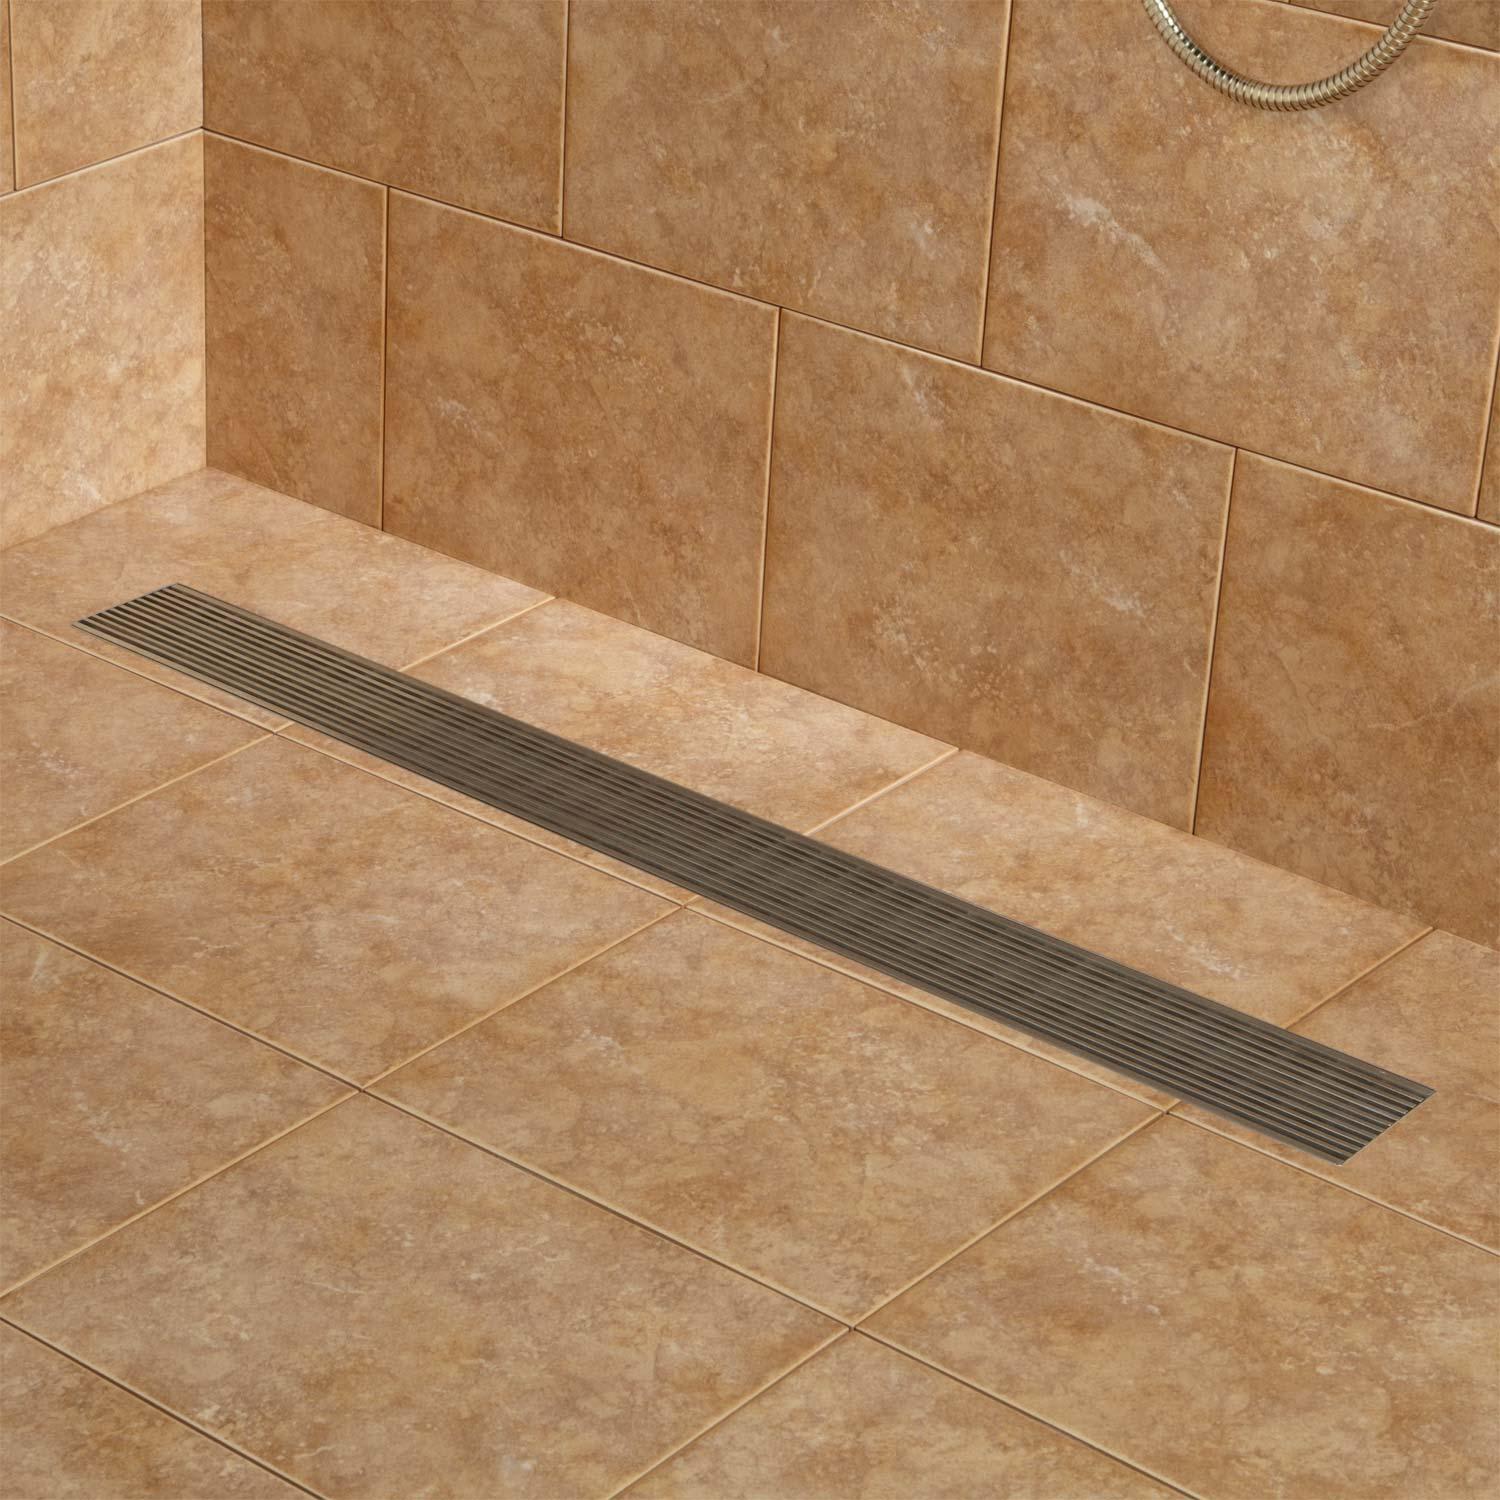 How to Install a Shower Drain in a Basement